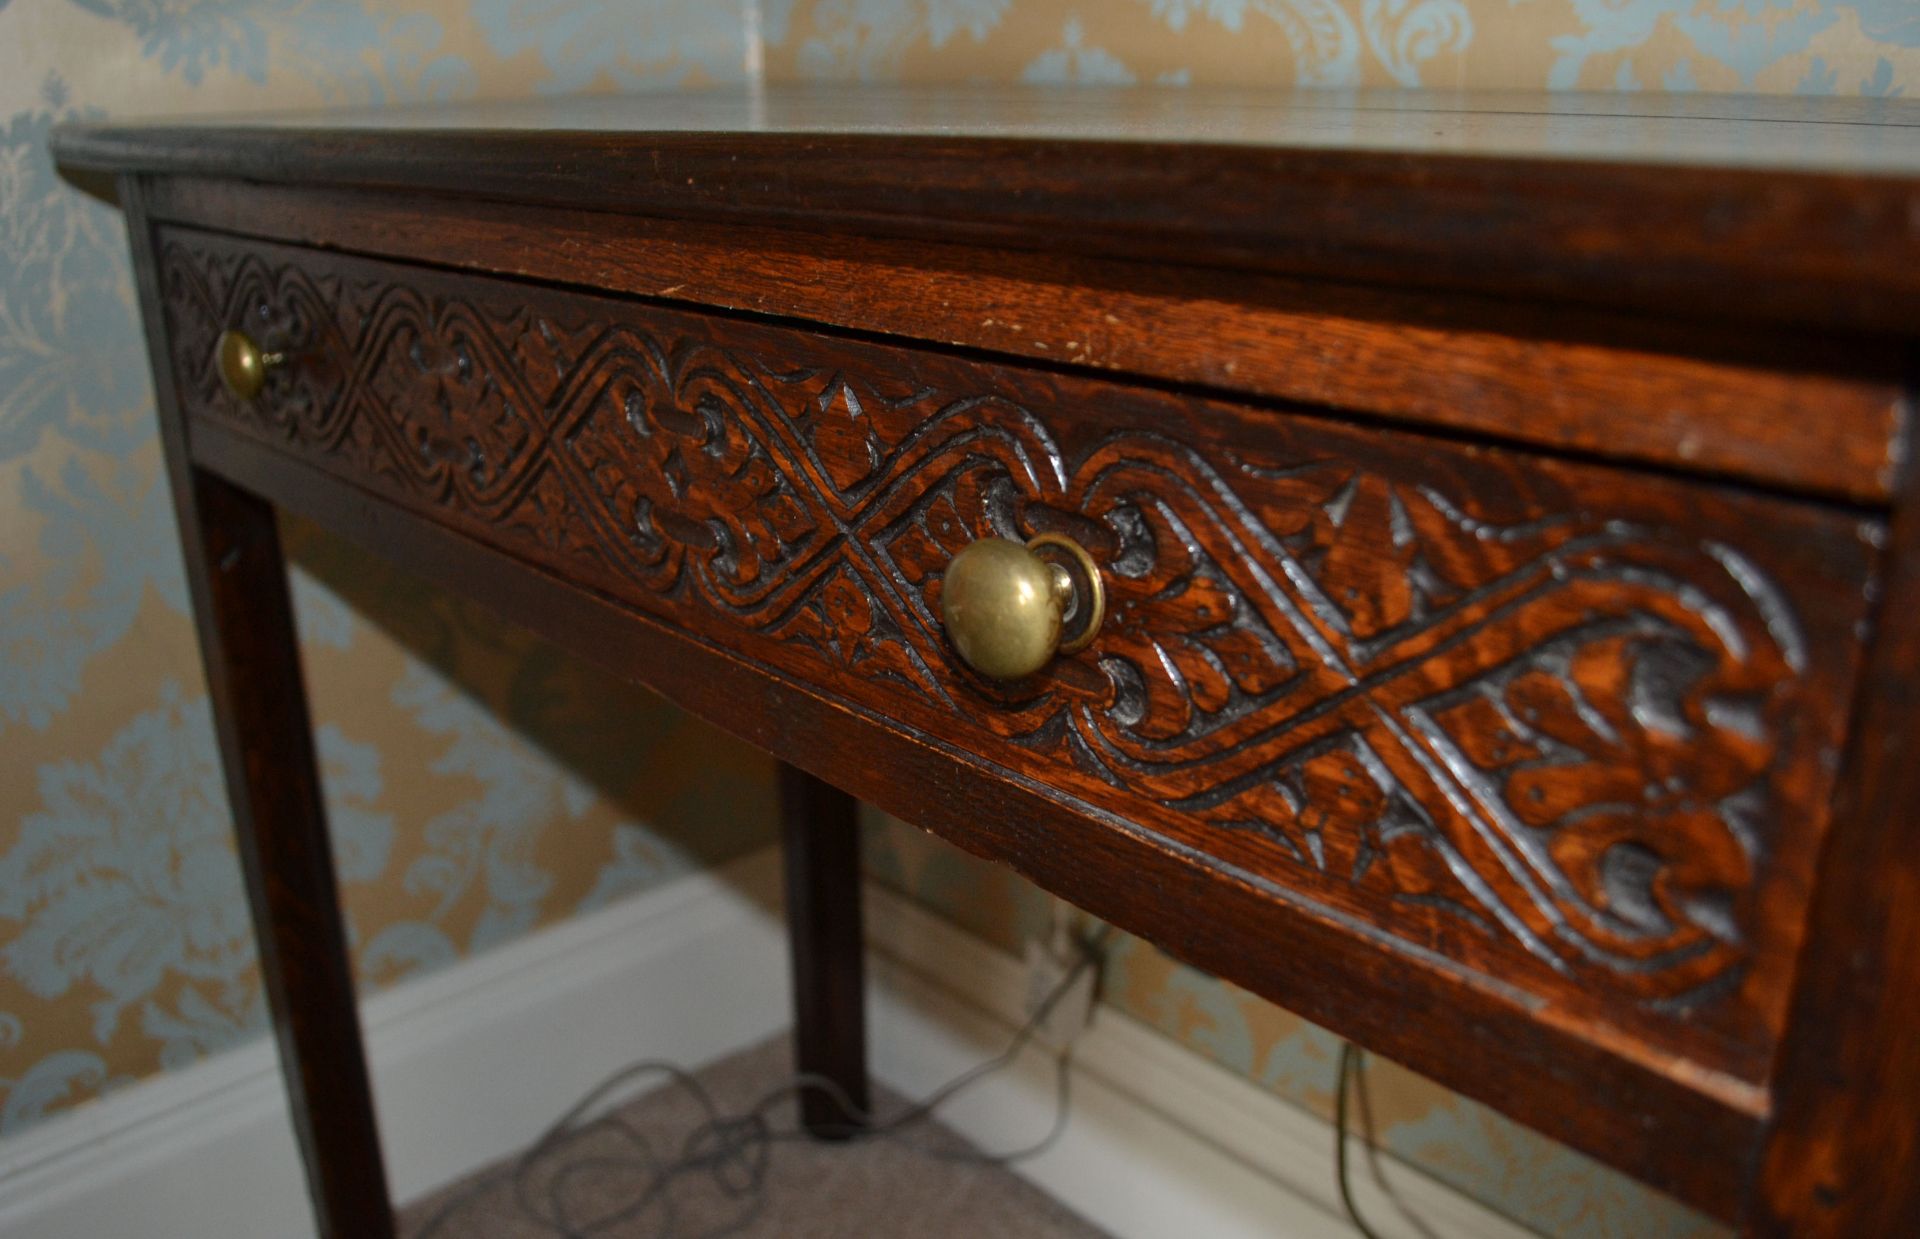 1 x Antique Solid Wood Console Table - CL226 - Location: Knutsford WA16 - NO VAT ON THE HAMMER - Image 5 of 9